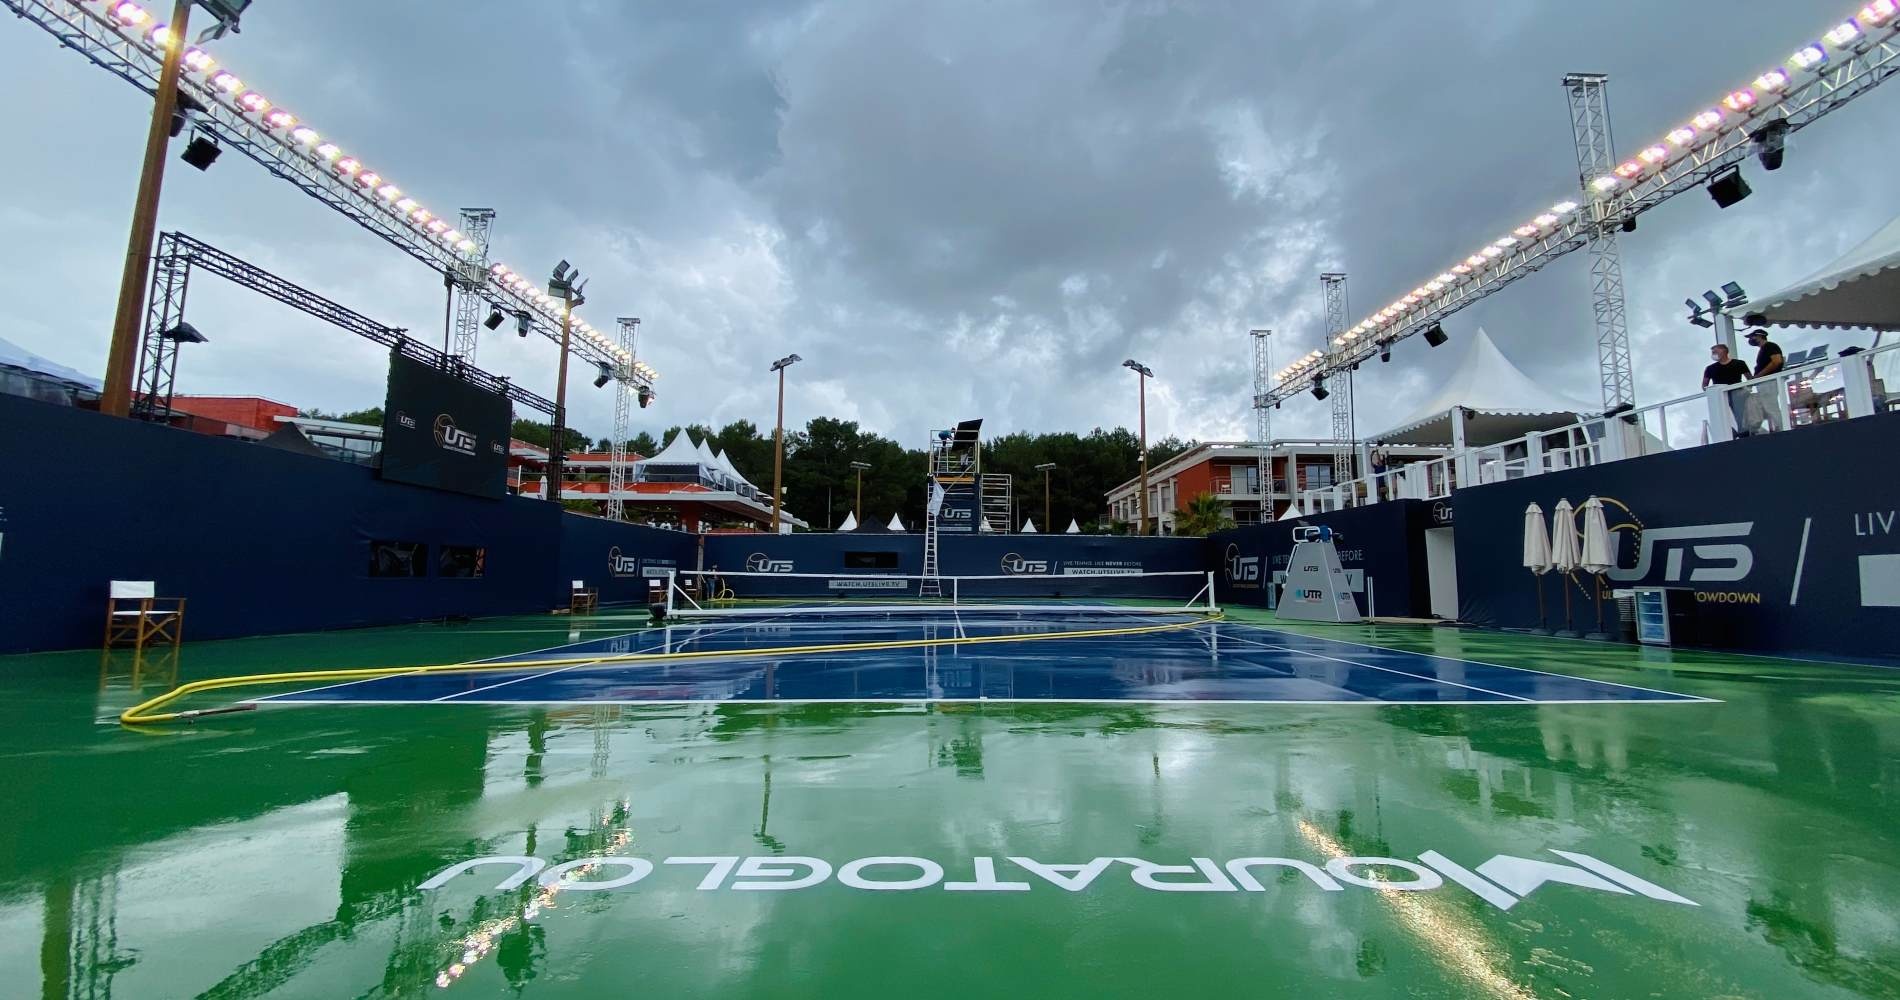 The centre court of the Mouratoglou Academy wet